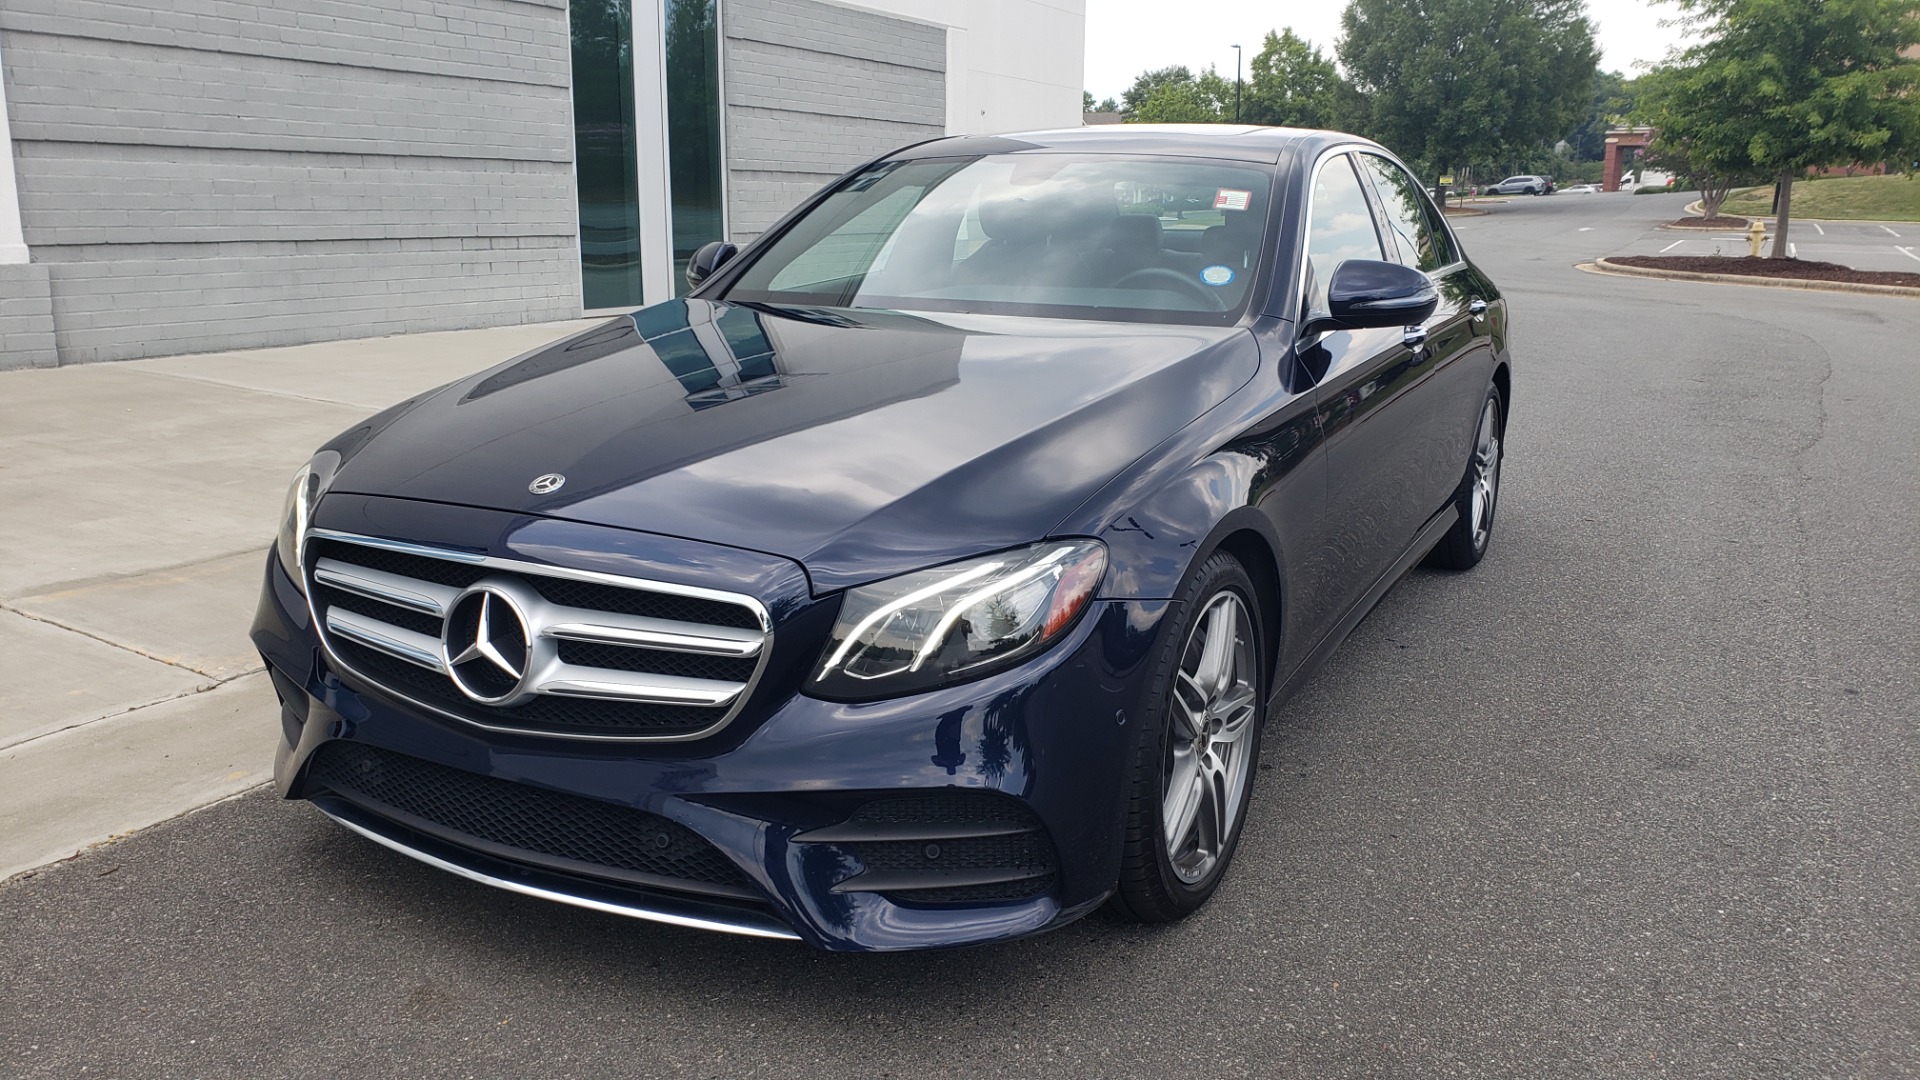 Used 2018 Mercedes-Benz E-CLASS E 300 PREMIUM / AMG LINE / PARK ASST / BURMESTER / SUNROOF / REARVIEW for sale Sold at Formula Imports in Charlotte NC 28227 3